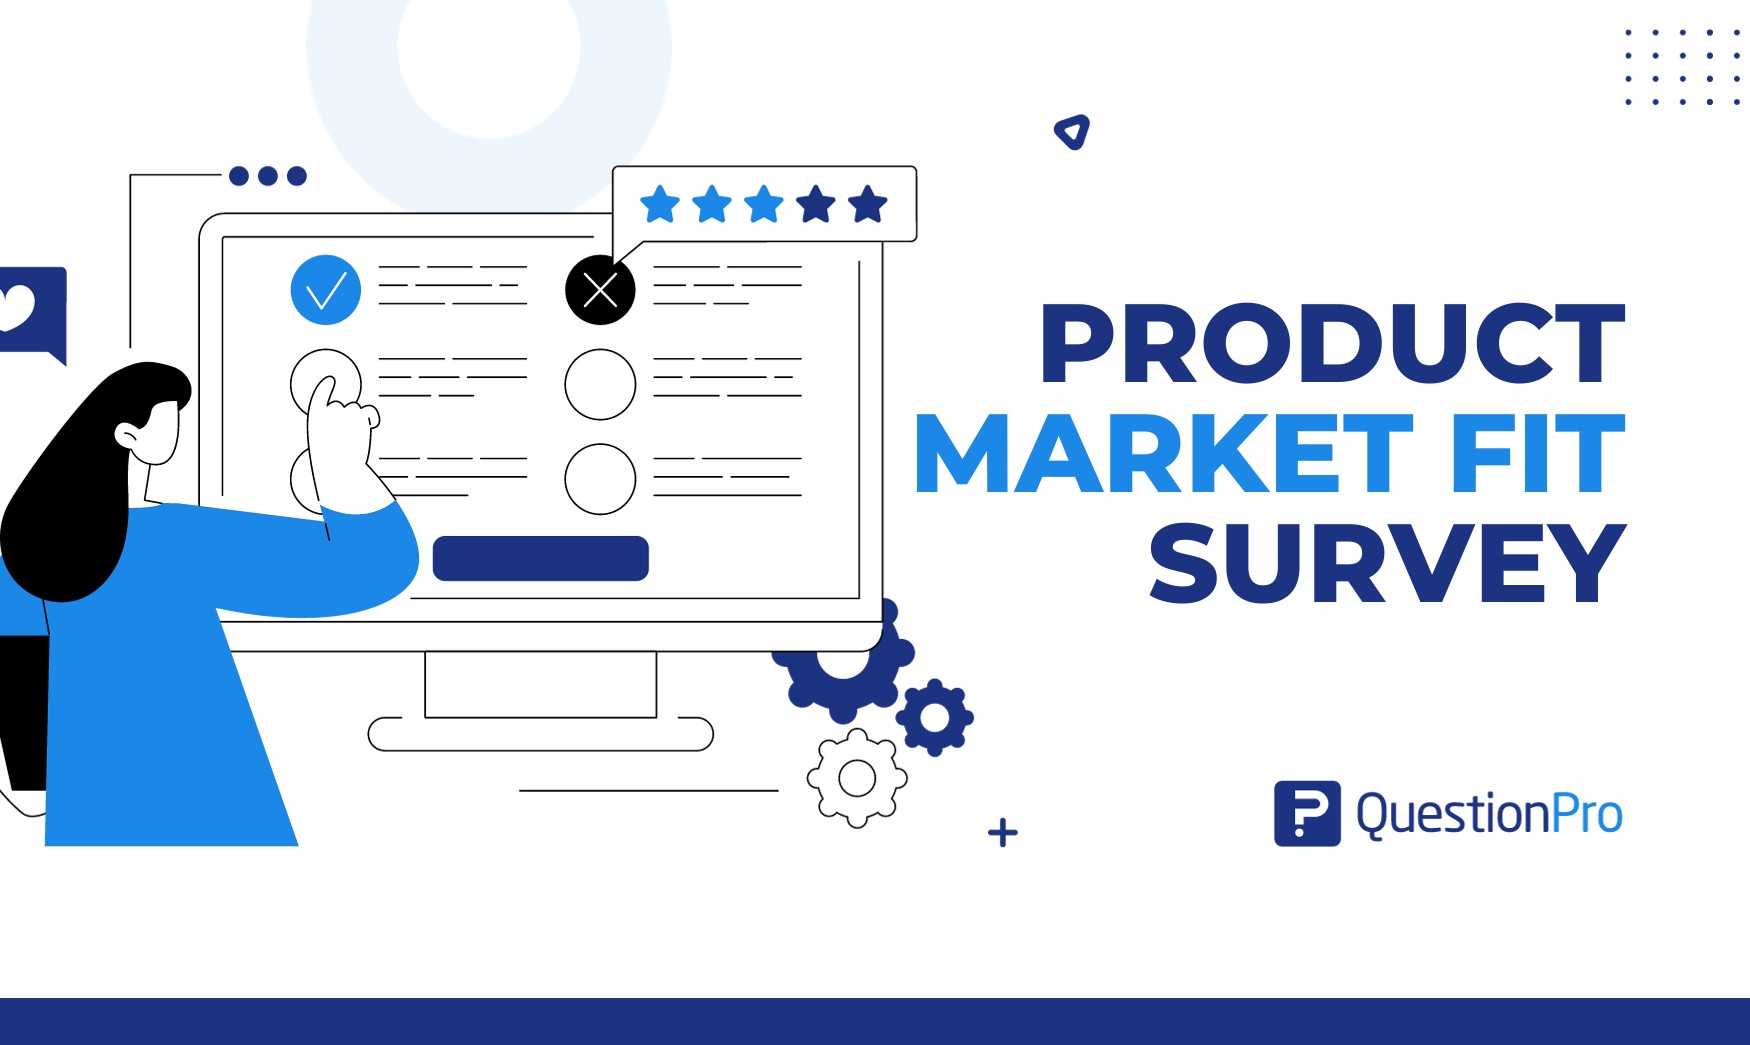 A Product-Market Fit survey helps companies determine if their product meets market needs. Learn how to conduct a PMF Survey.